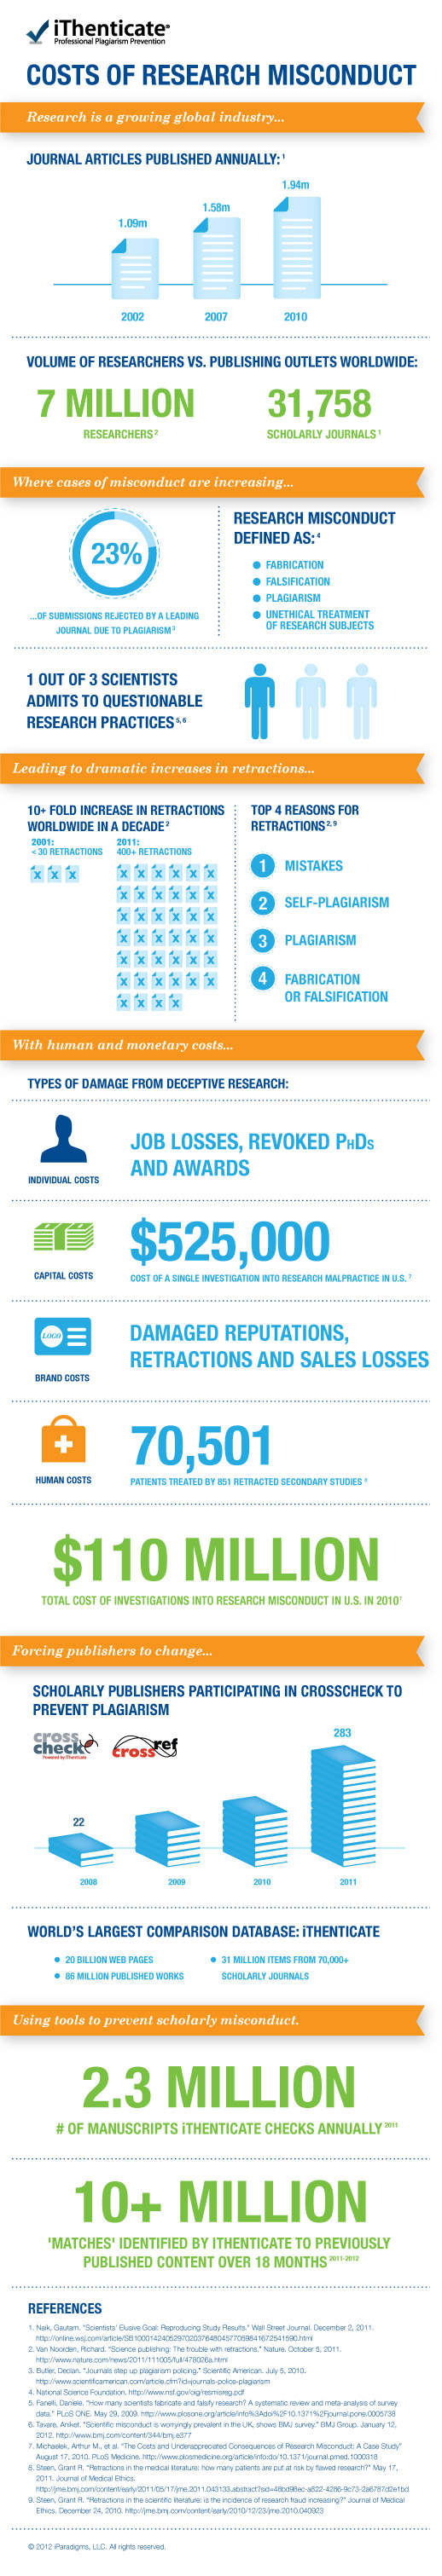 iThenticate Research Misconduct Infographic